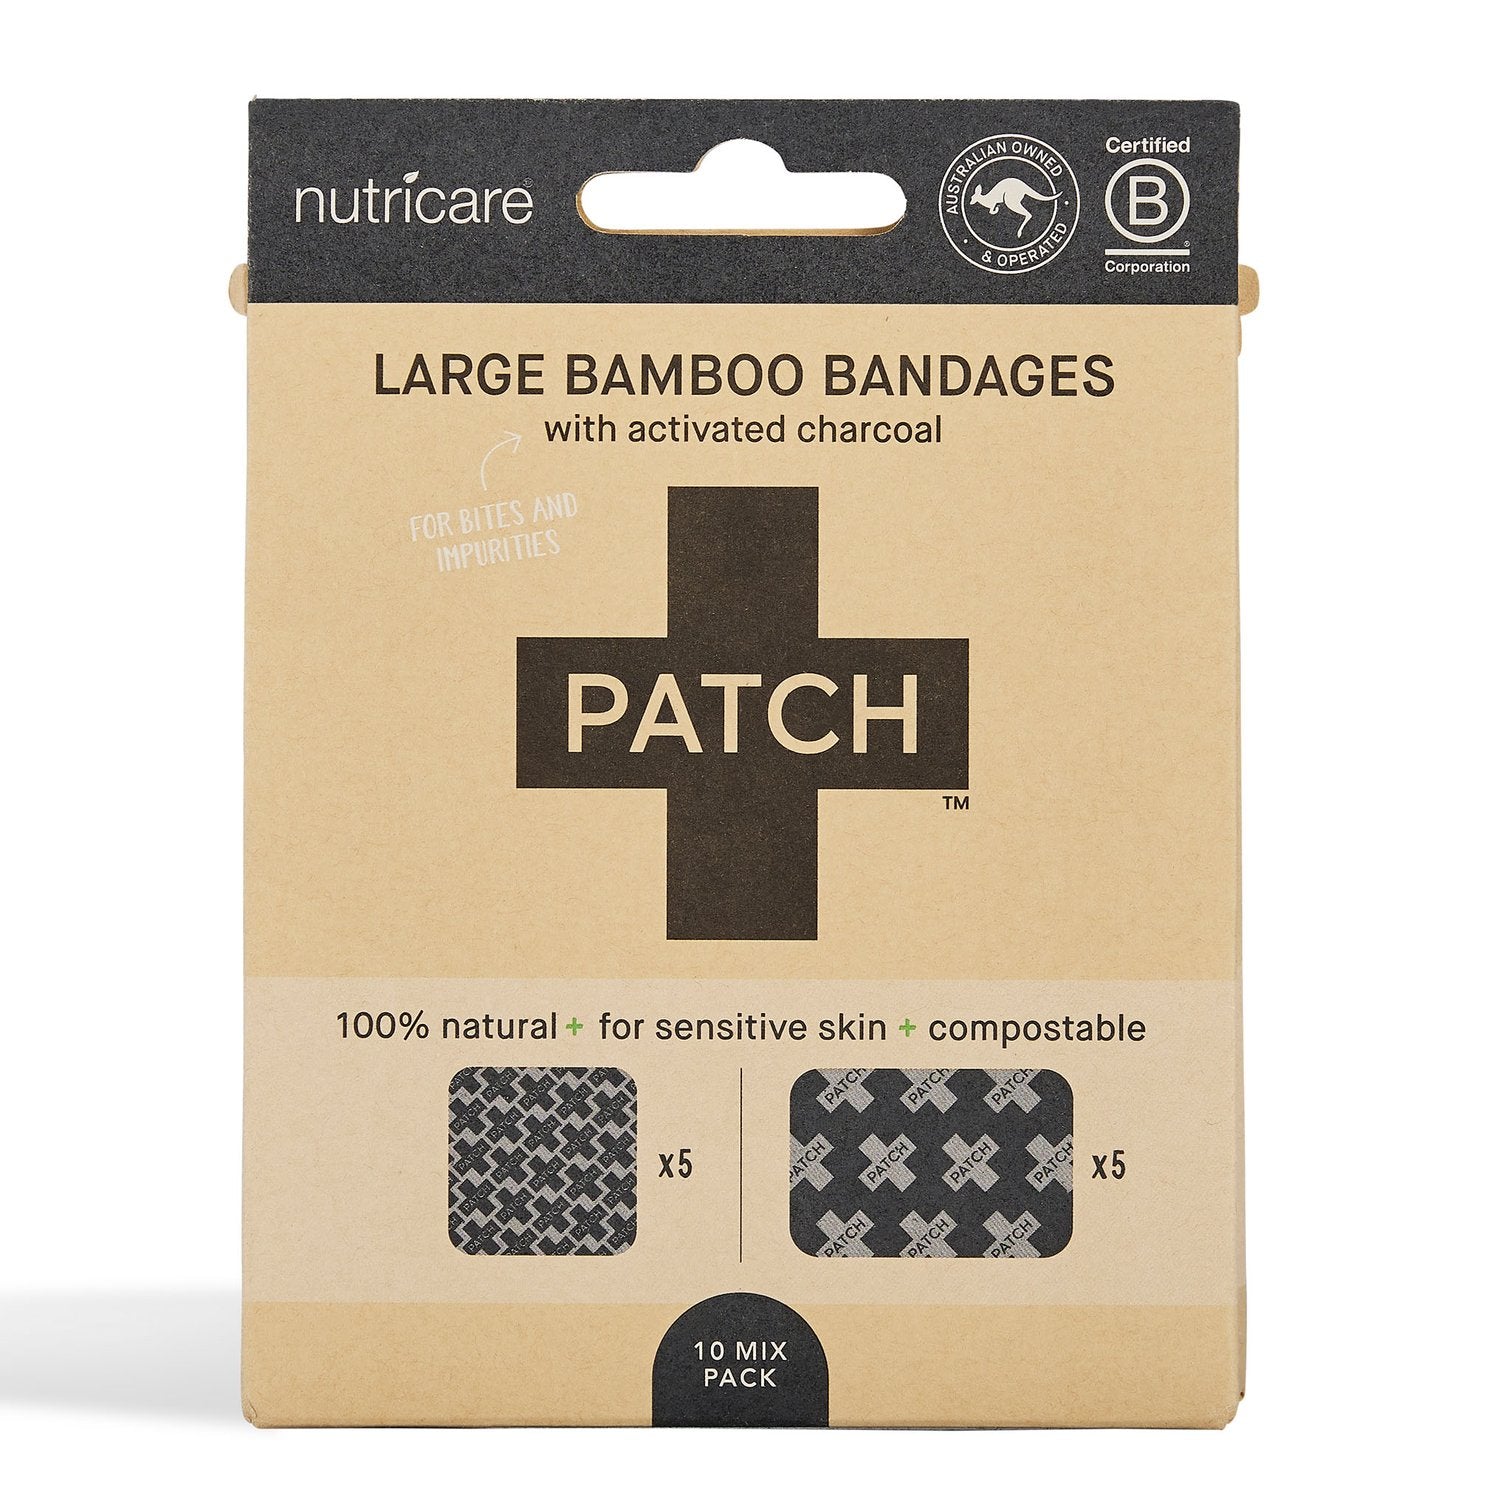 Patch | Activated Charcoal Bamboo Bandages - Large Square and Rectangles - 10 pack